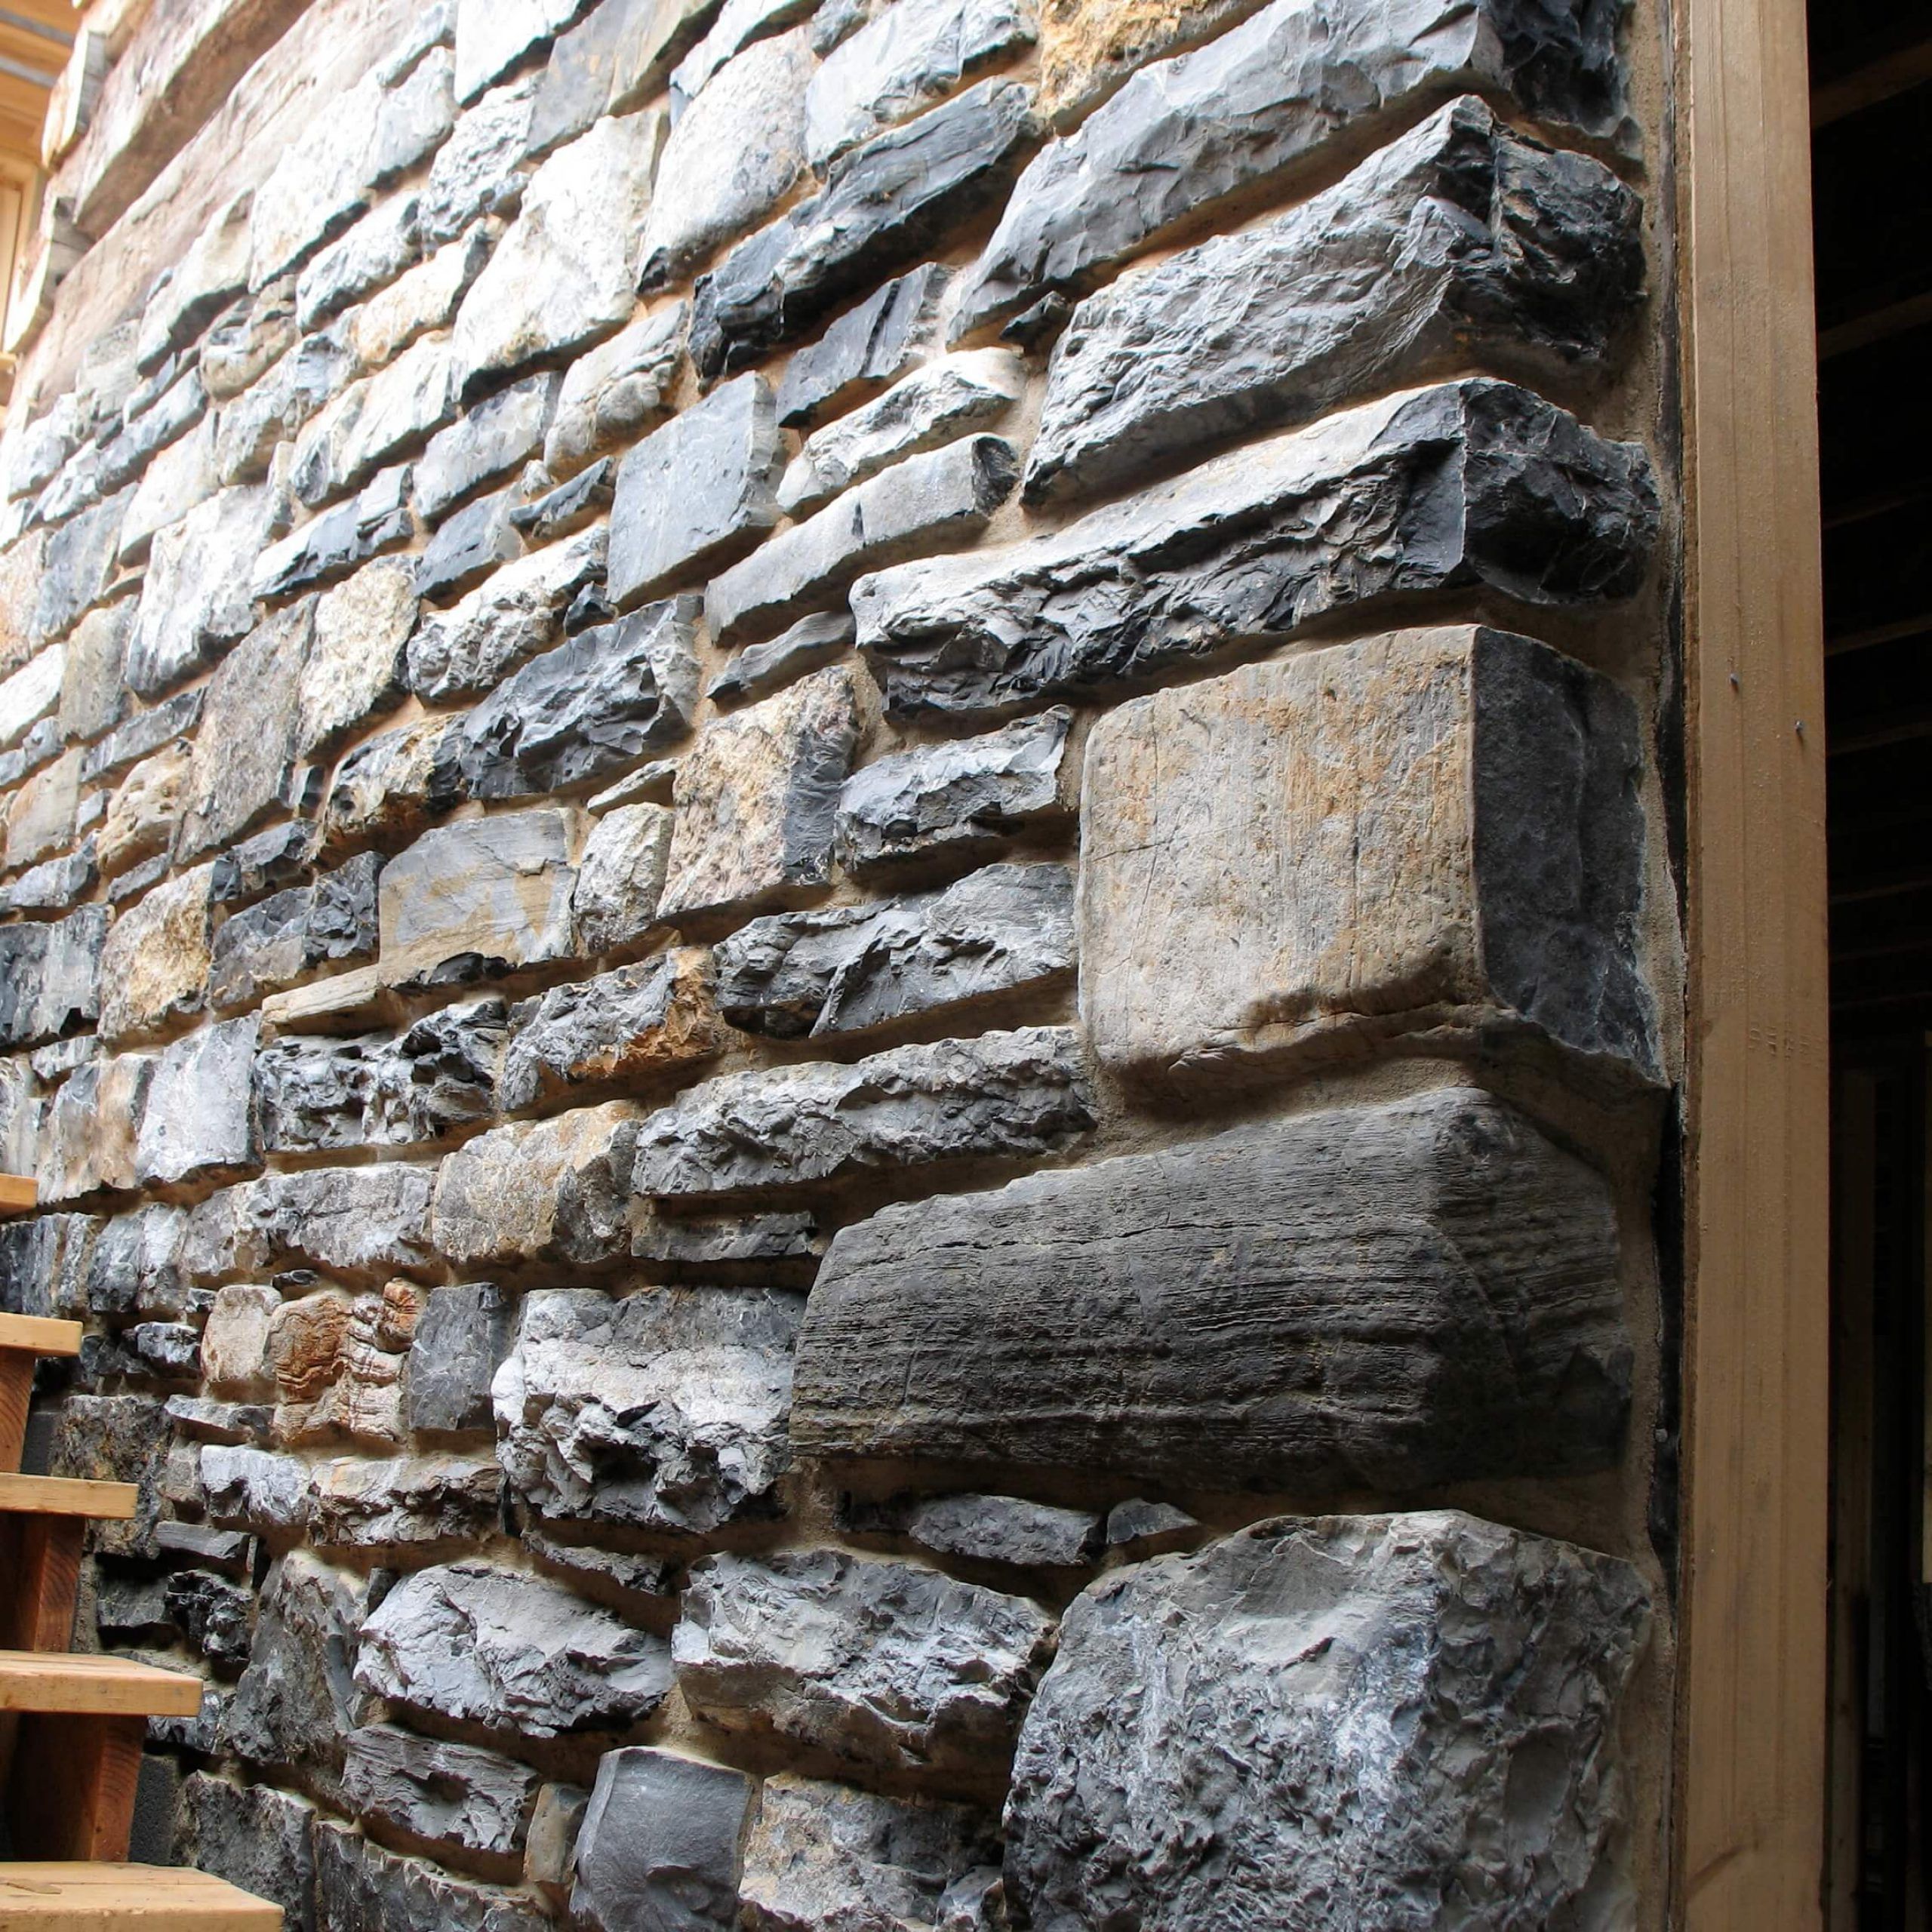 Stones Wall Art For Latest 3 Stunning Displays Of Interior Stone Wall Design (View 6 of 15)